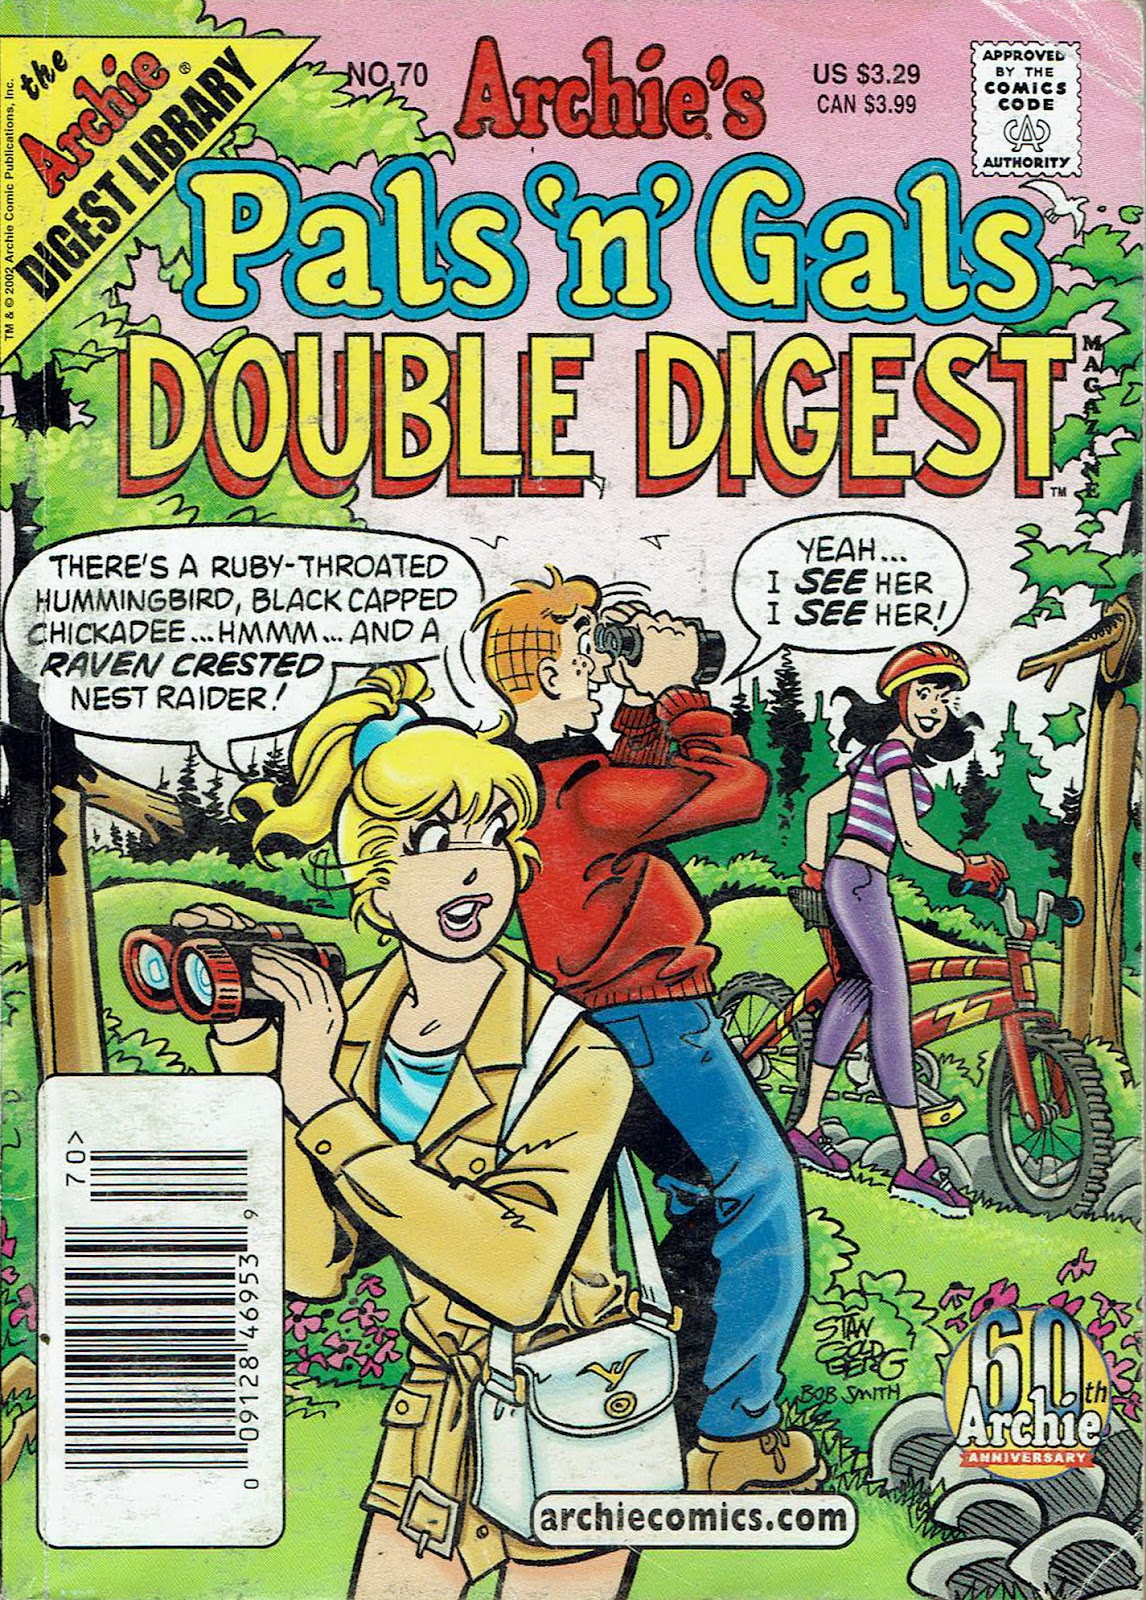 Archie's Pals 'n' Gals Double Digest Magazine issue 70 - Page 1